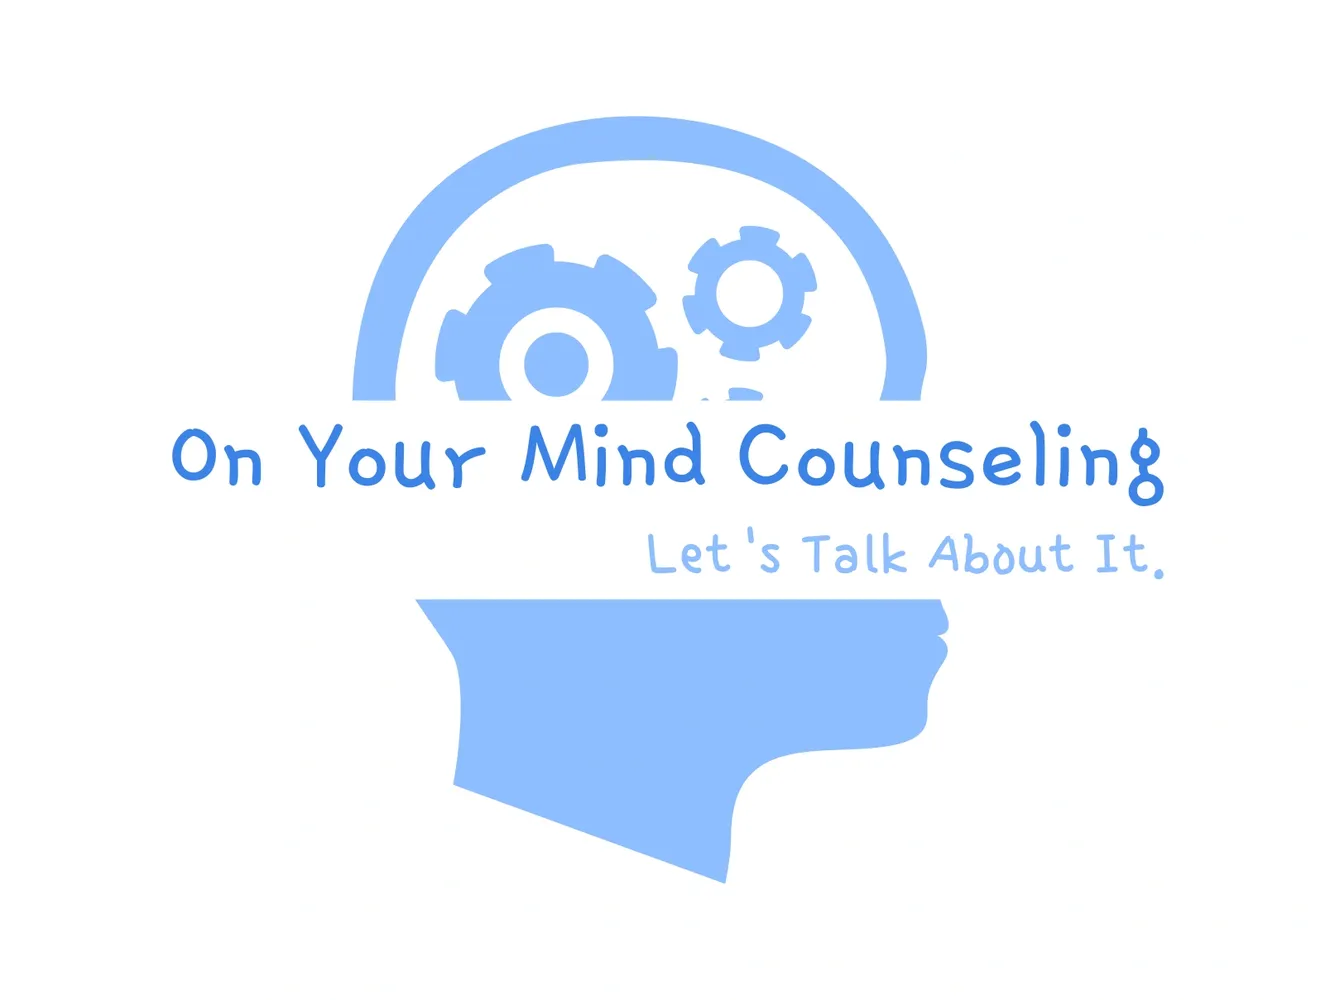 On Your Mind Counseling